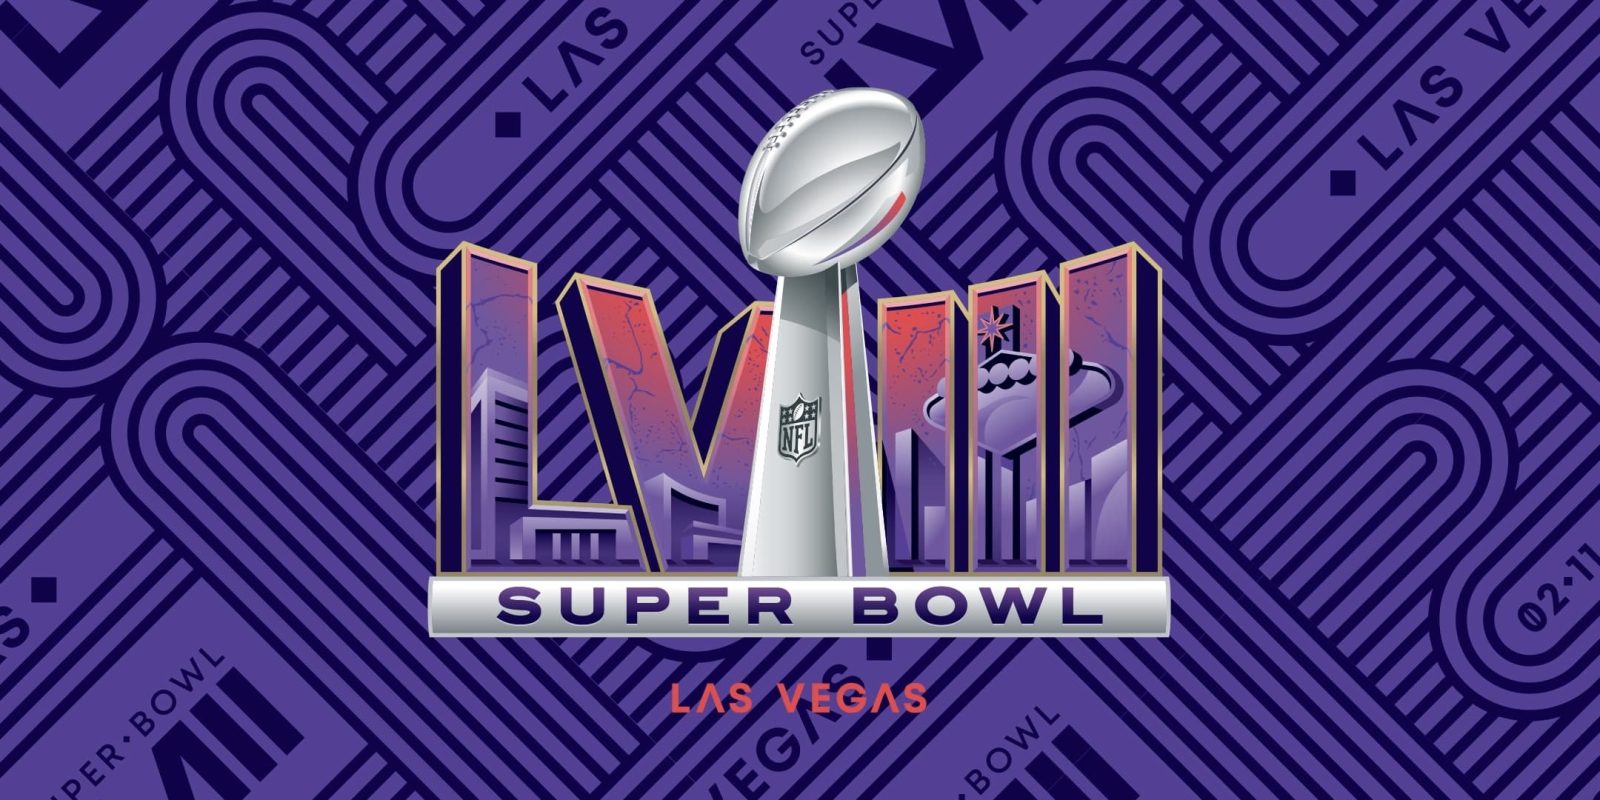 How to watch Super Bowl LVIII